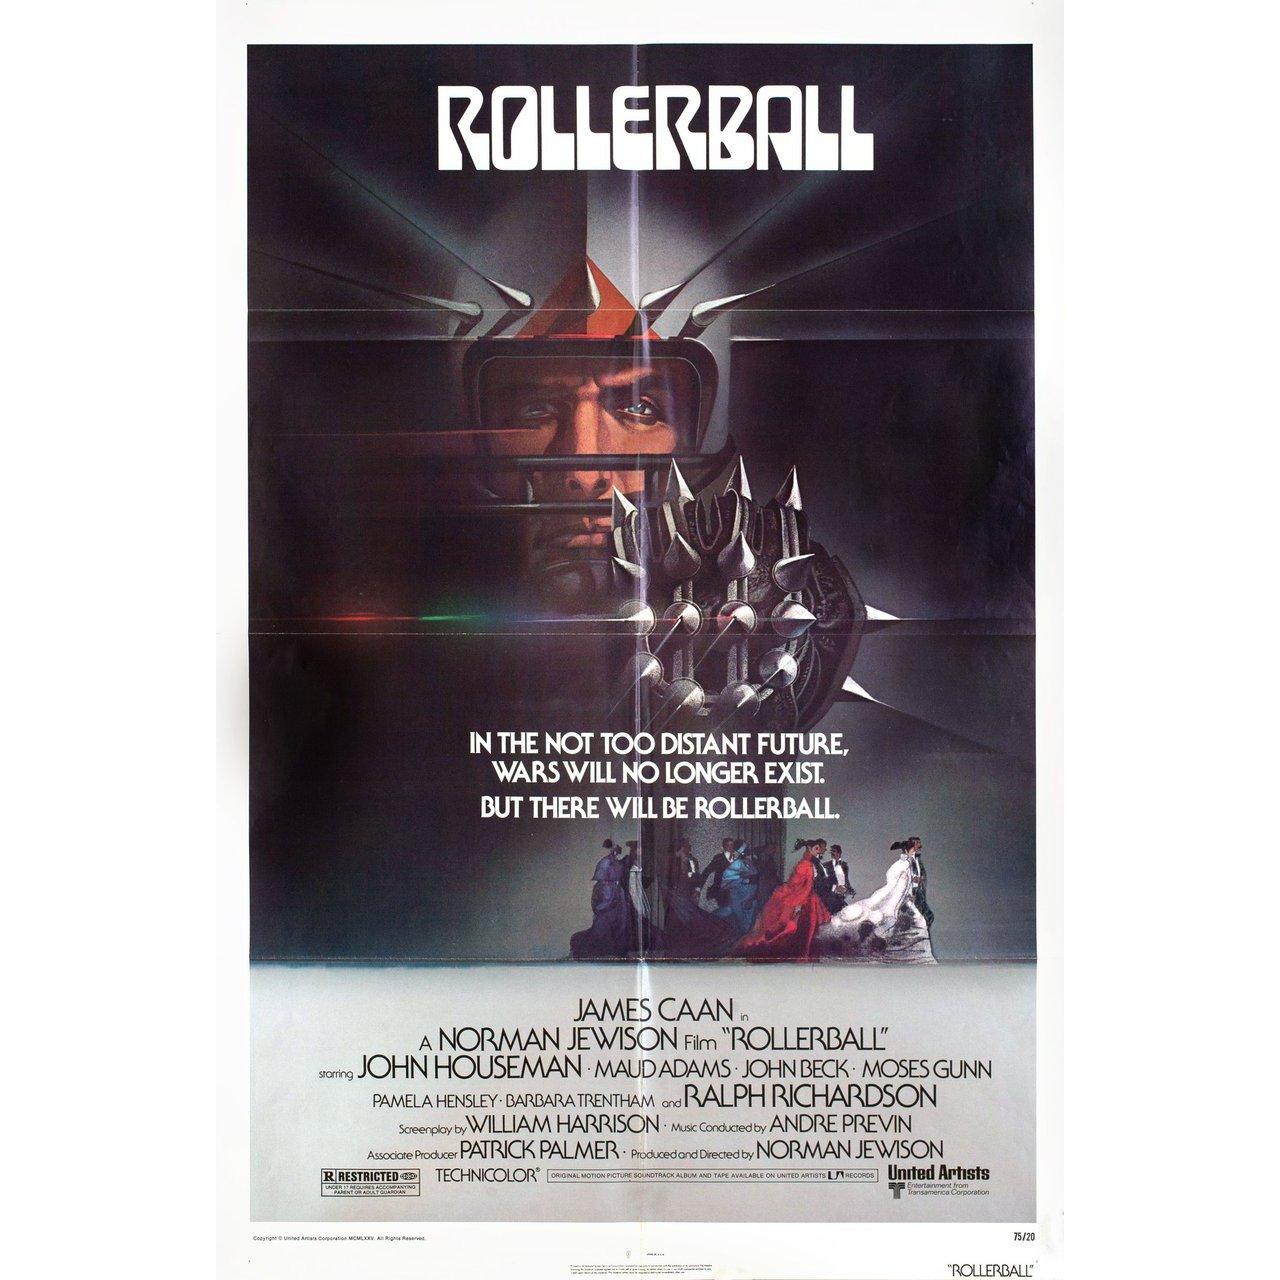 Original 1975 U.S. one sheet poster by Bob Peak for the film Rollerball directed by Norman Jewison with James Caan / John Houseman / Maud Adams / John Beck. Very Good-Fine condition, folded. Many original posters were issued folded or were